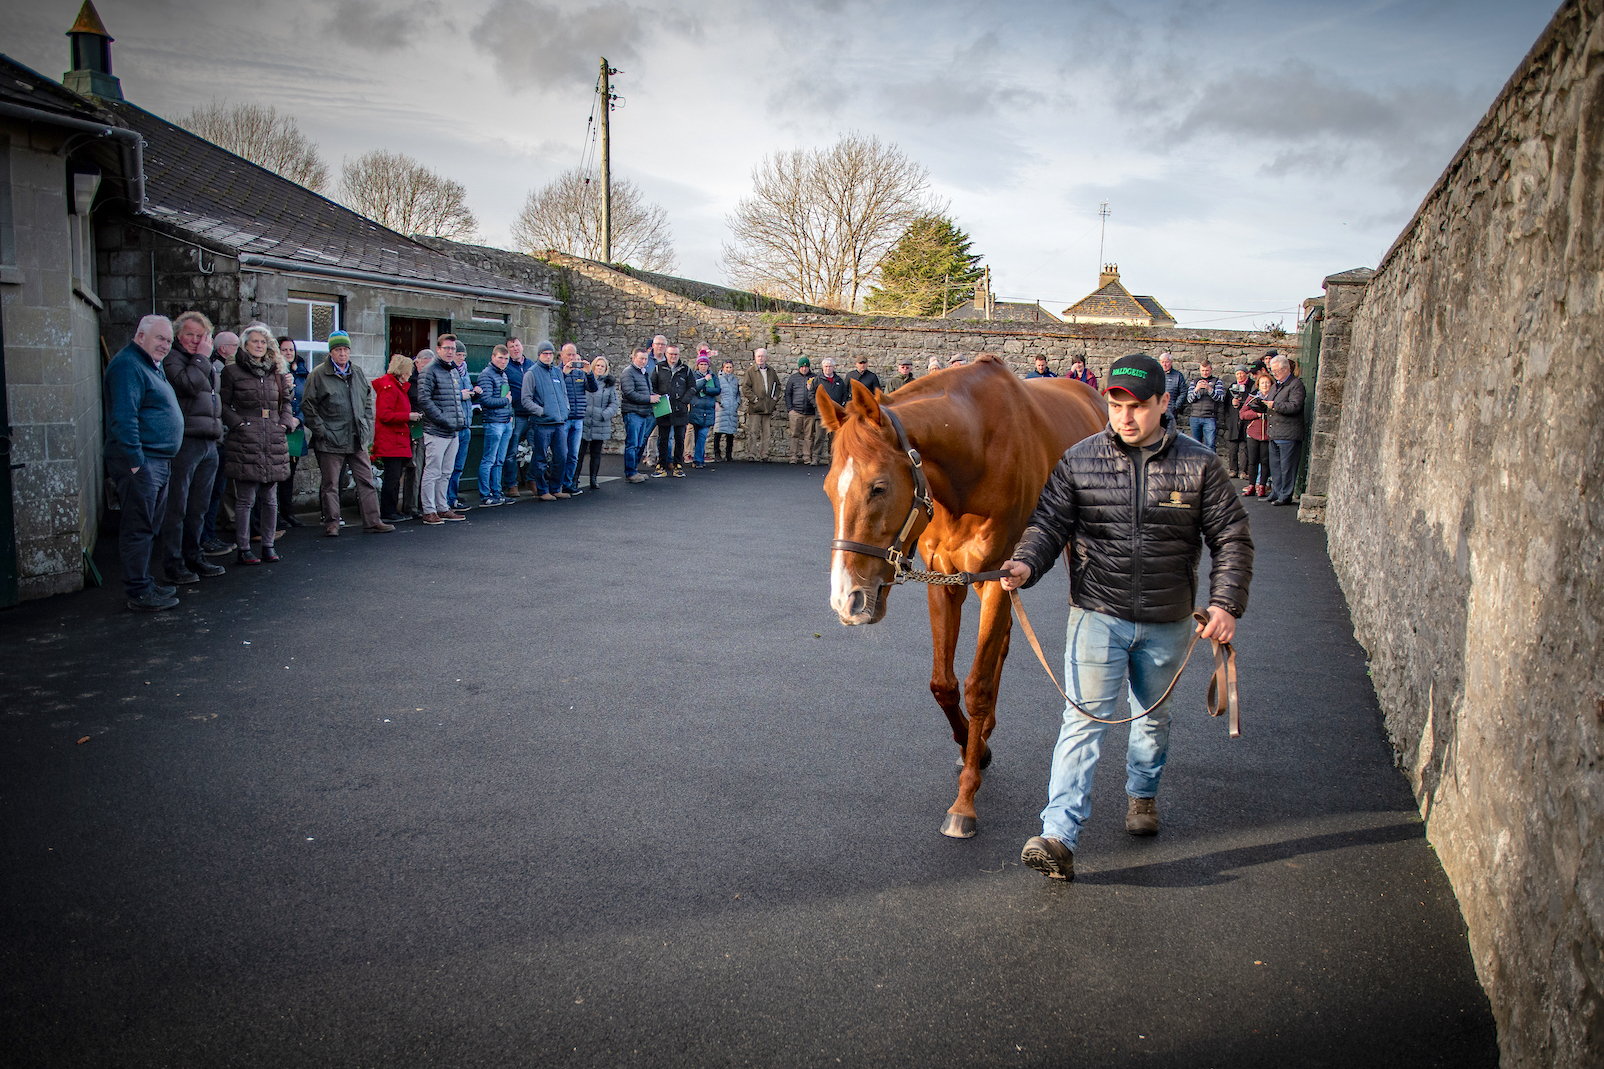 Popular attraction: 2019 Arc winner Waldgeist, whose first crop of foals sold for up to €180,000 last year, was drew plenty of visitors at Ballylinch Stud during the 2020 Stallion Trail. He will be there again this time. Photo: ITM